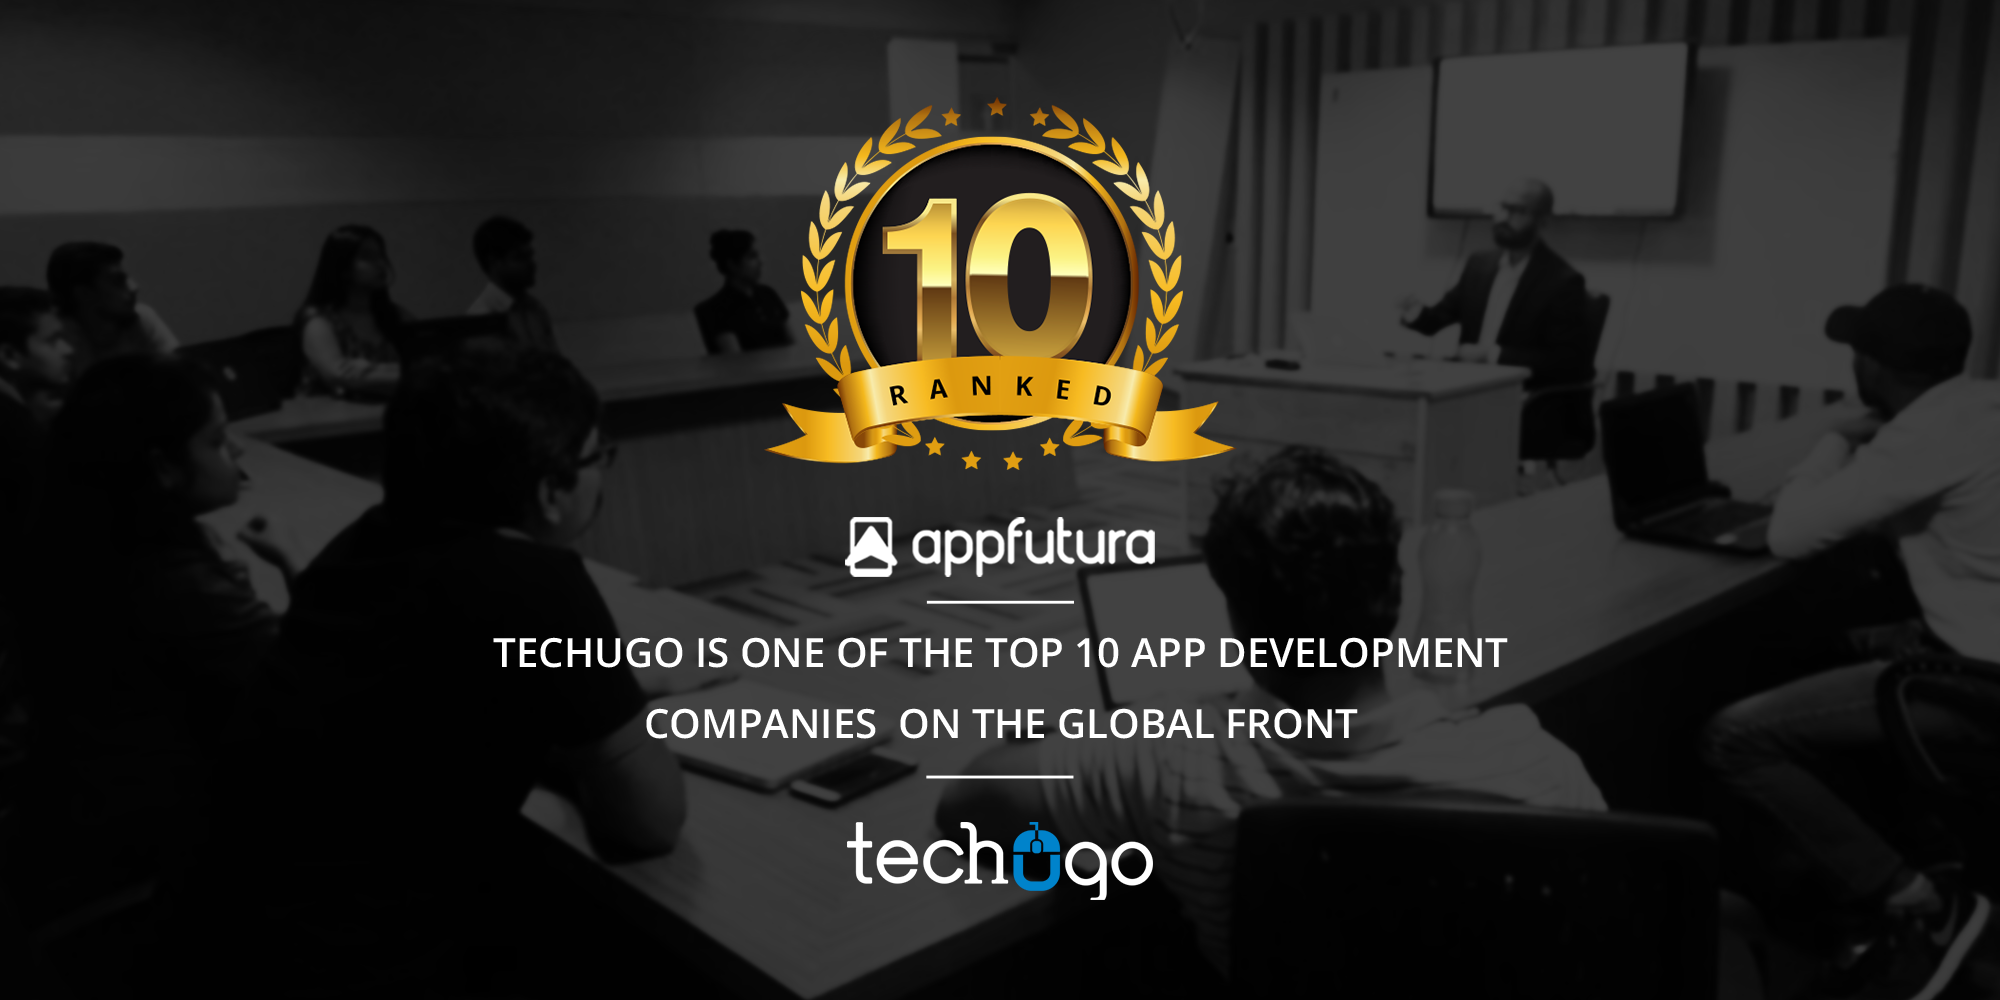 Techugo Is One Of The Top 10 App Development Companies On The Global Front